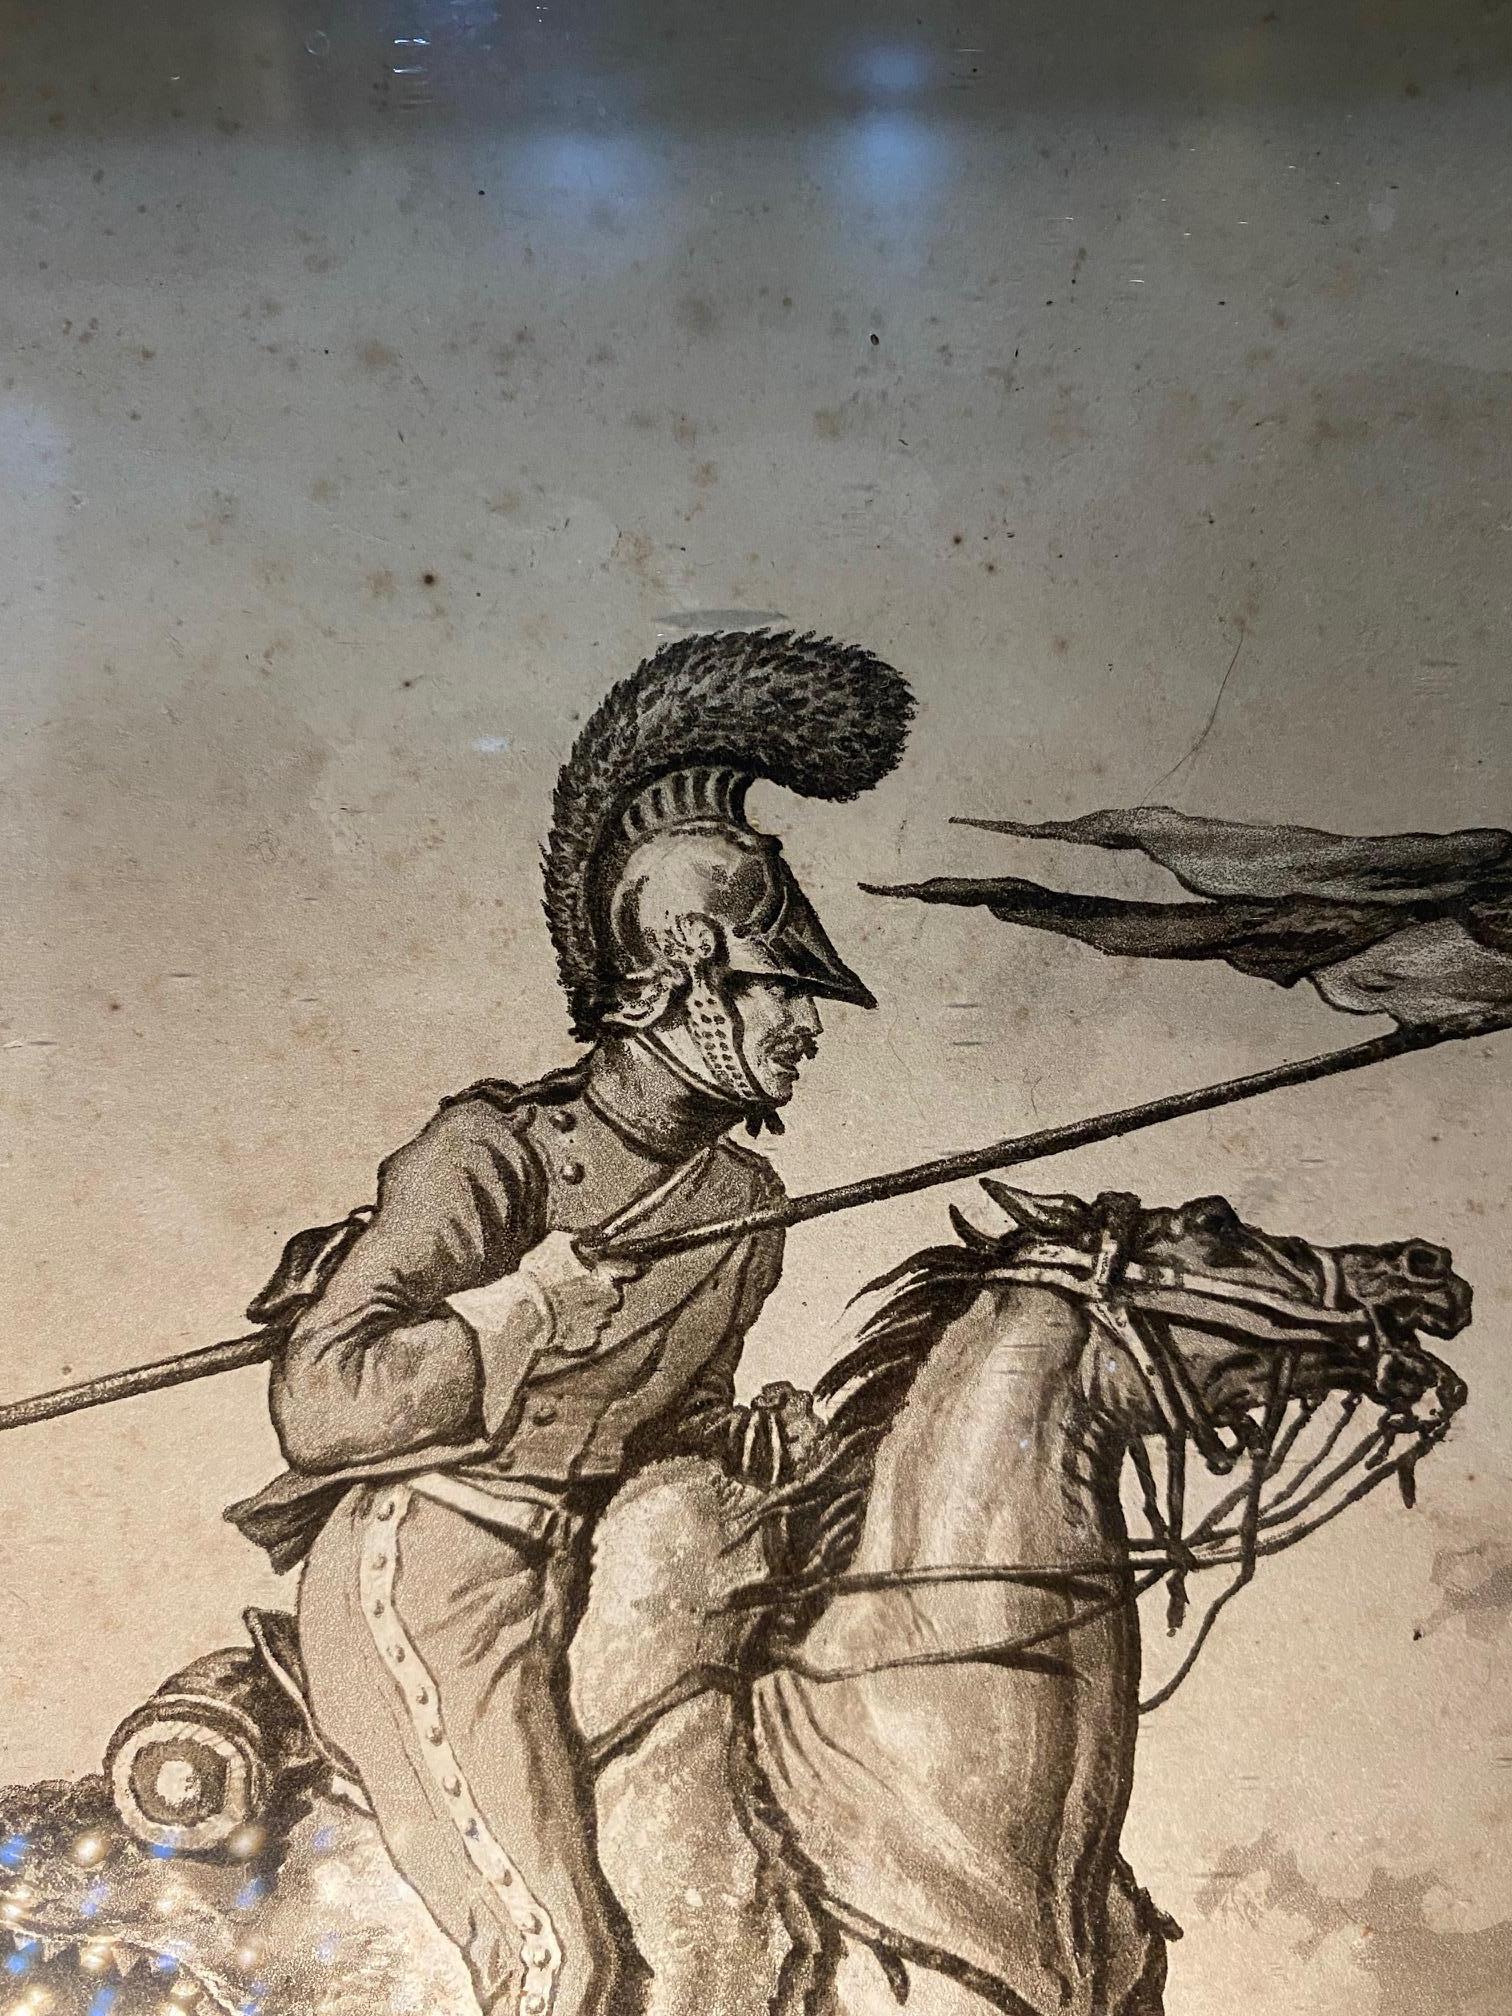 Galloping rider by Carle Vernet - Drawing on paper 25x30 cm - Art by Carle Vernet (Antoine Charles Horace Vernet)